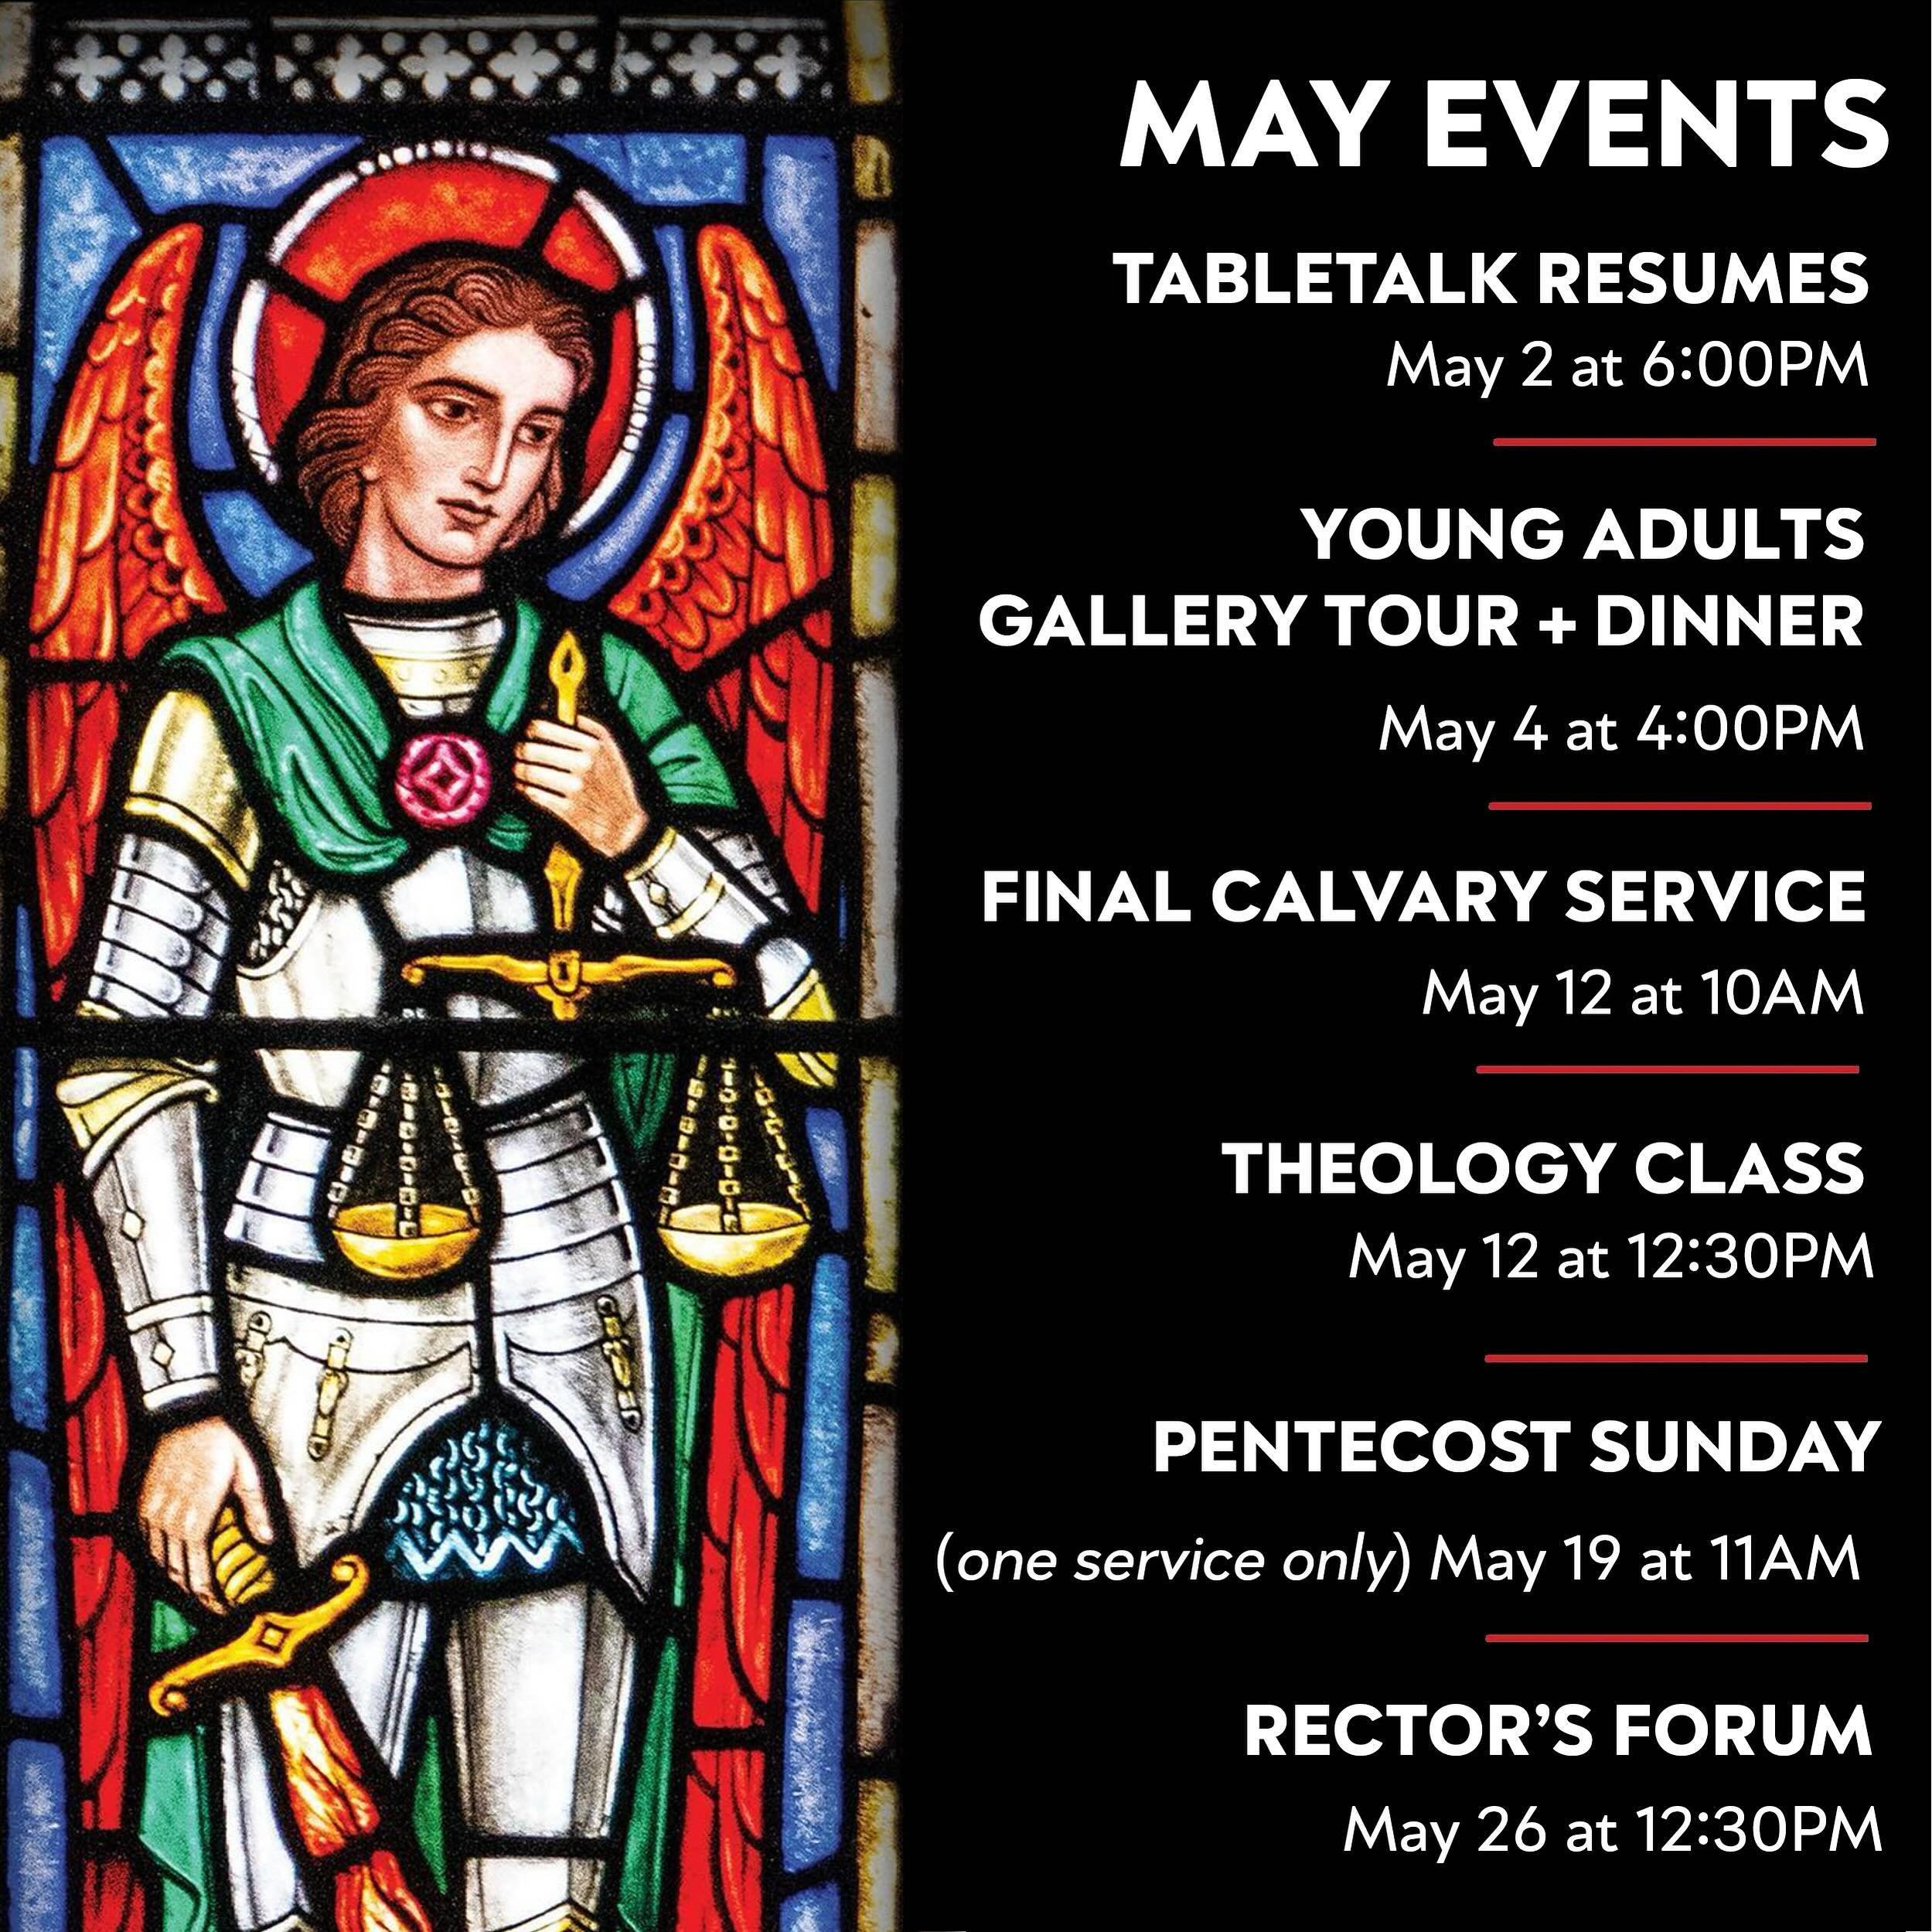 We are so excited for a very eventful spring season! Coming up there is something for everyone, from the young adults gallery walk through TriBeCa, to TableTalk, to the theology class, to the Rector&rsquo;s Forum.  We invite all parishioners to join 